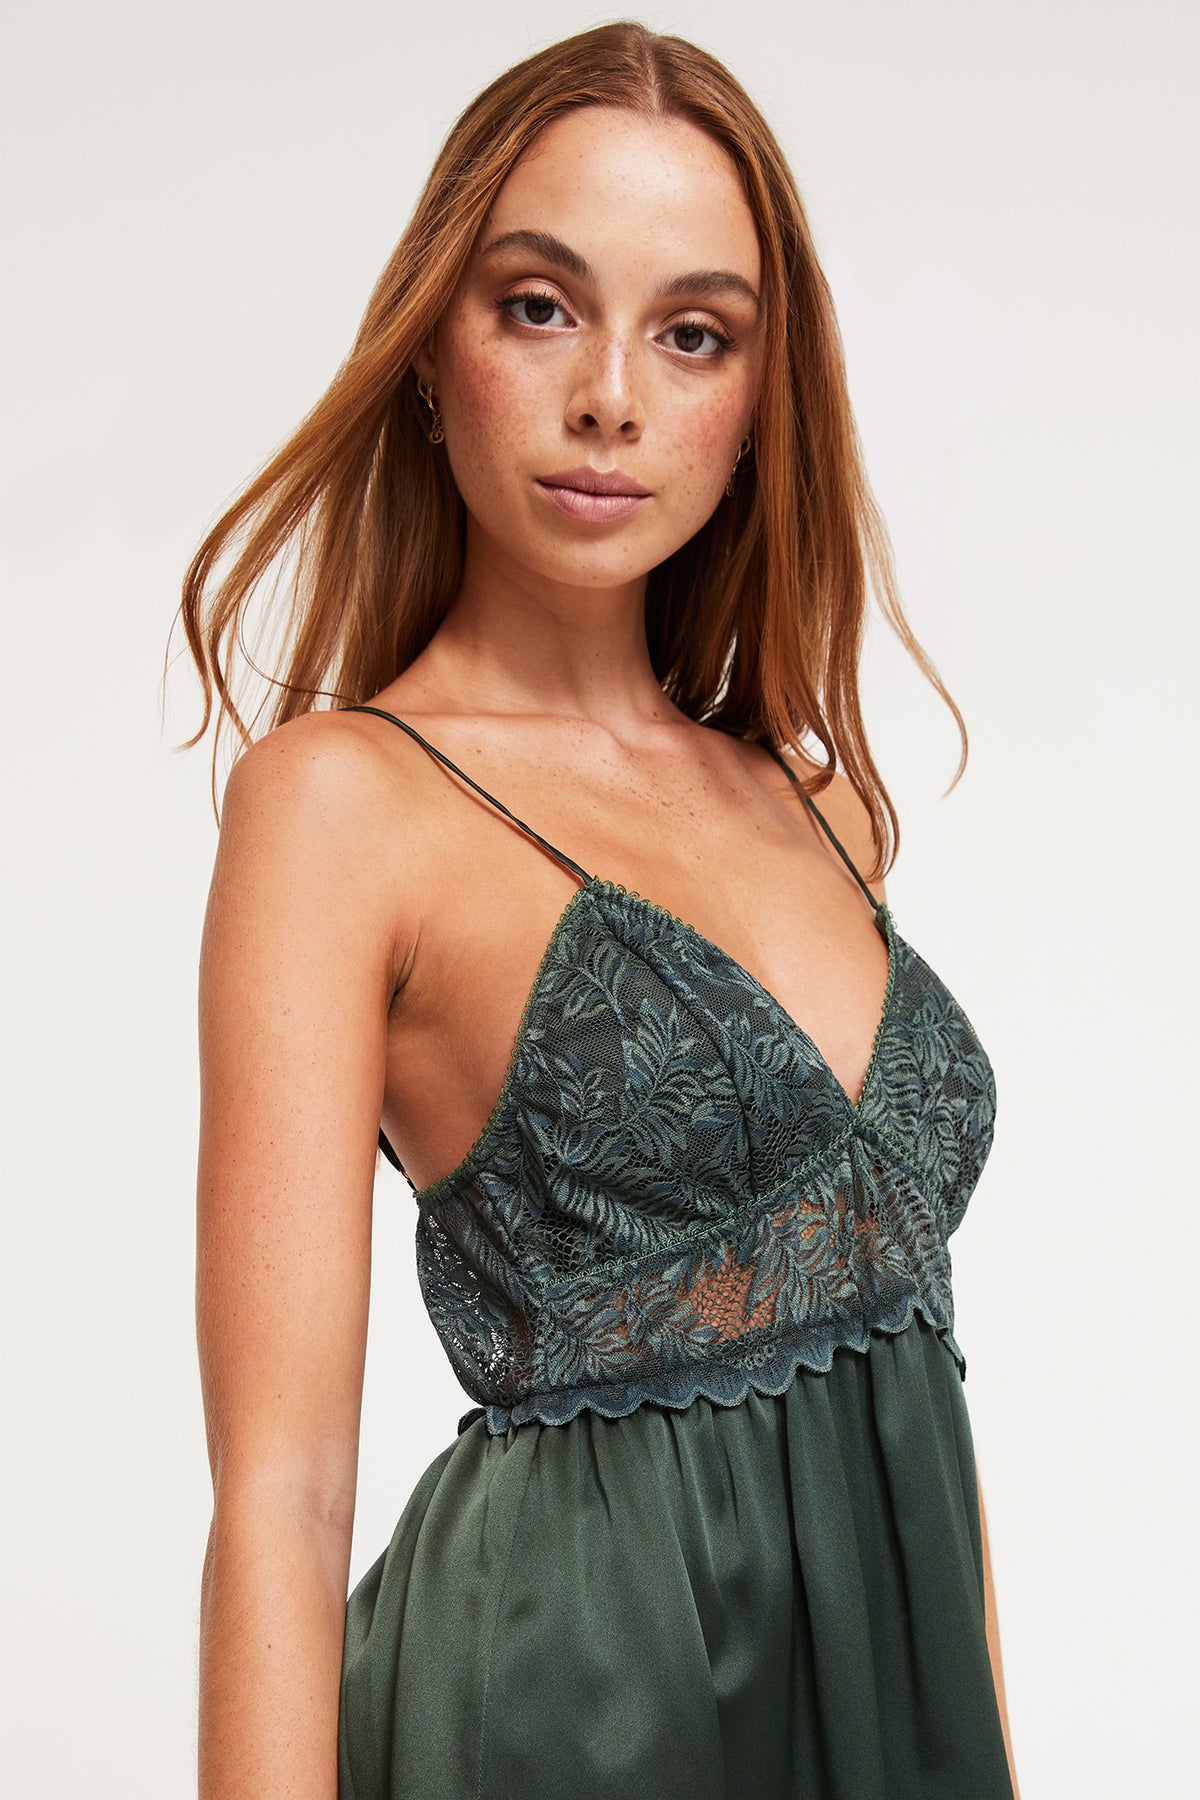 Discover the Stretch Lace Chemise in Ivy